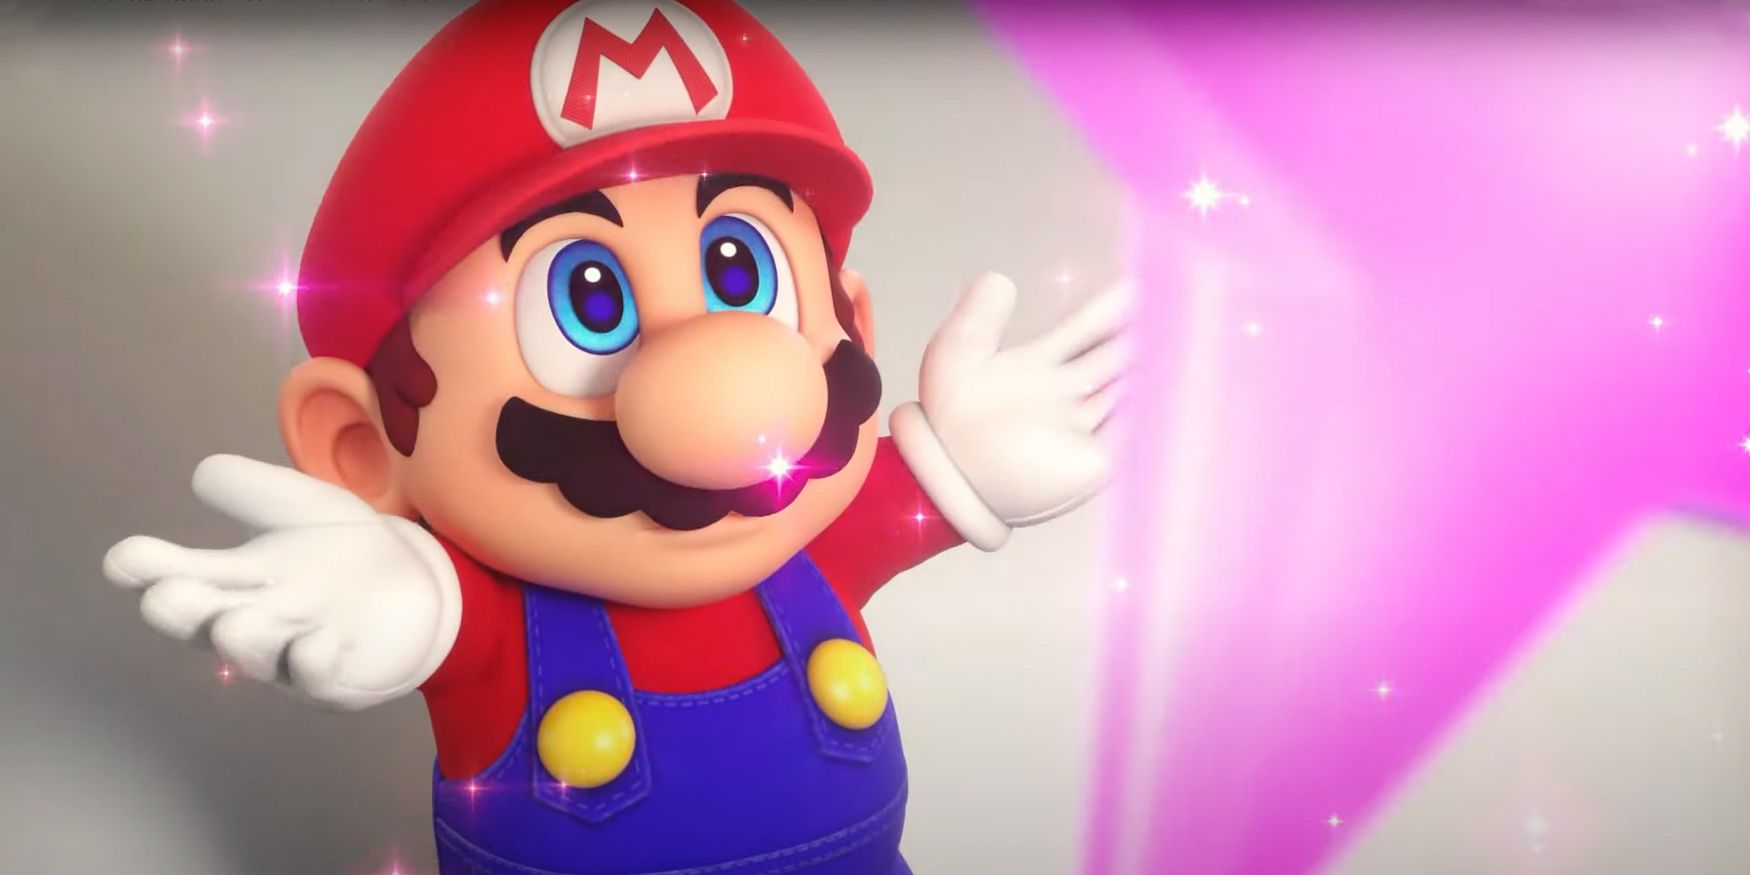 Mario looking up at a pink Super Star with his arms outstretched in the Super Mario RPG remake.